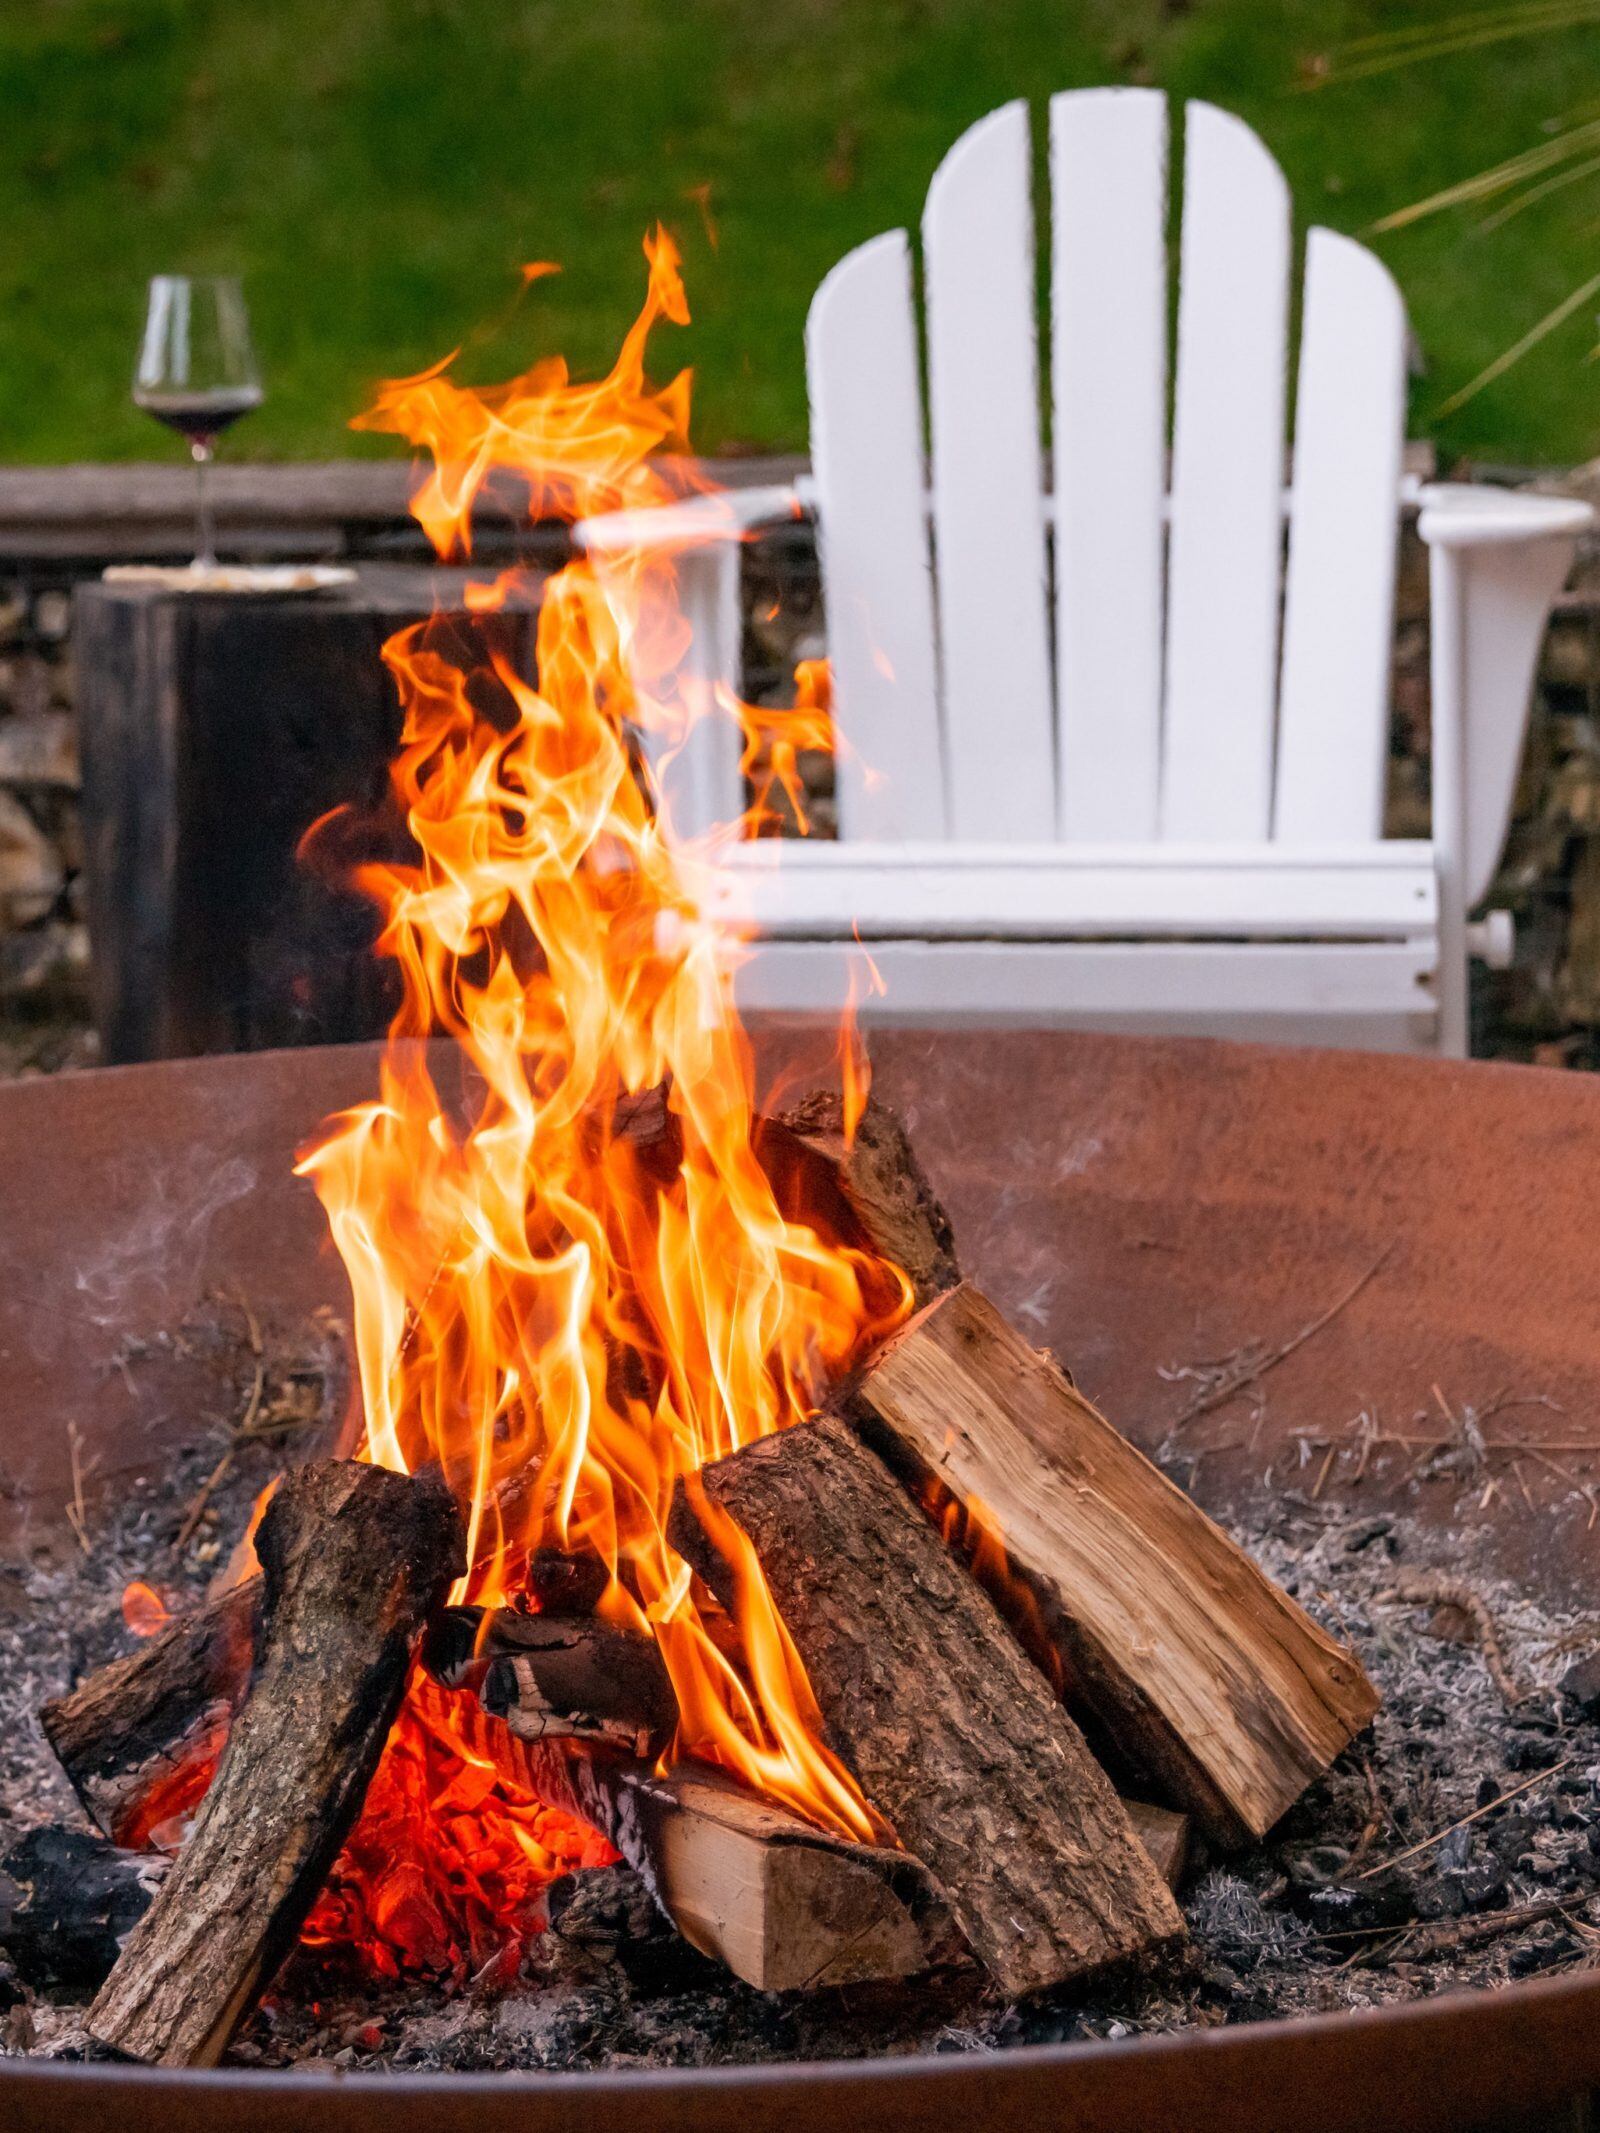 Can You Use Charcoal in a Fire Pit?: Ignite Safely!